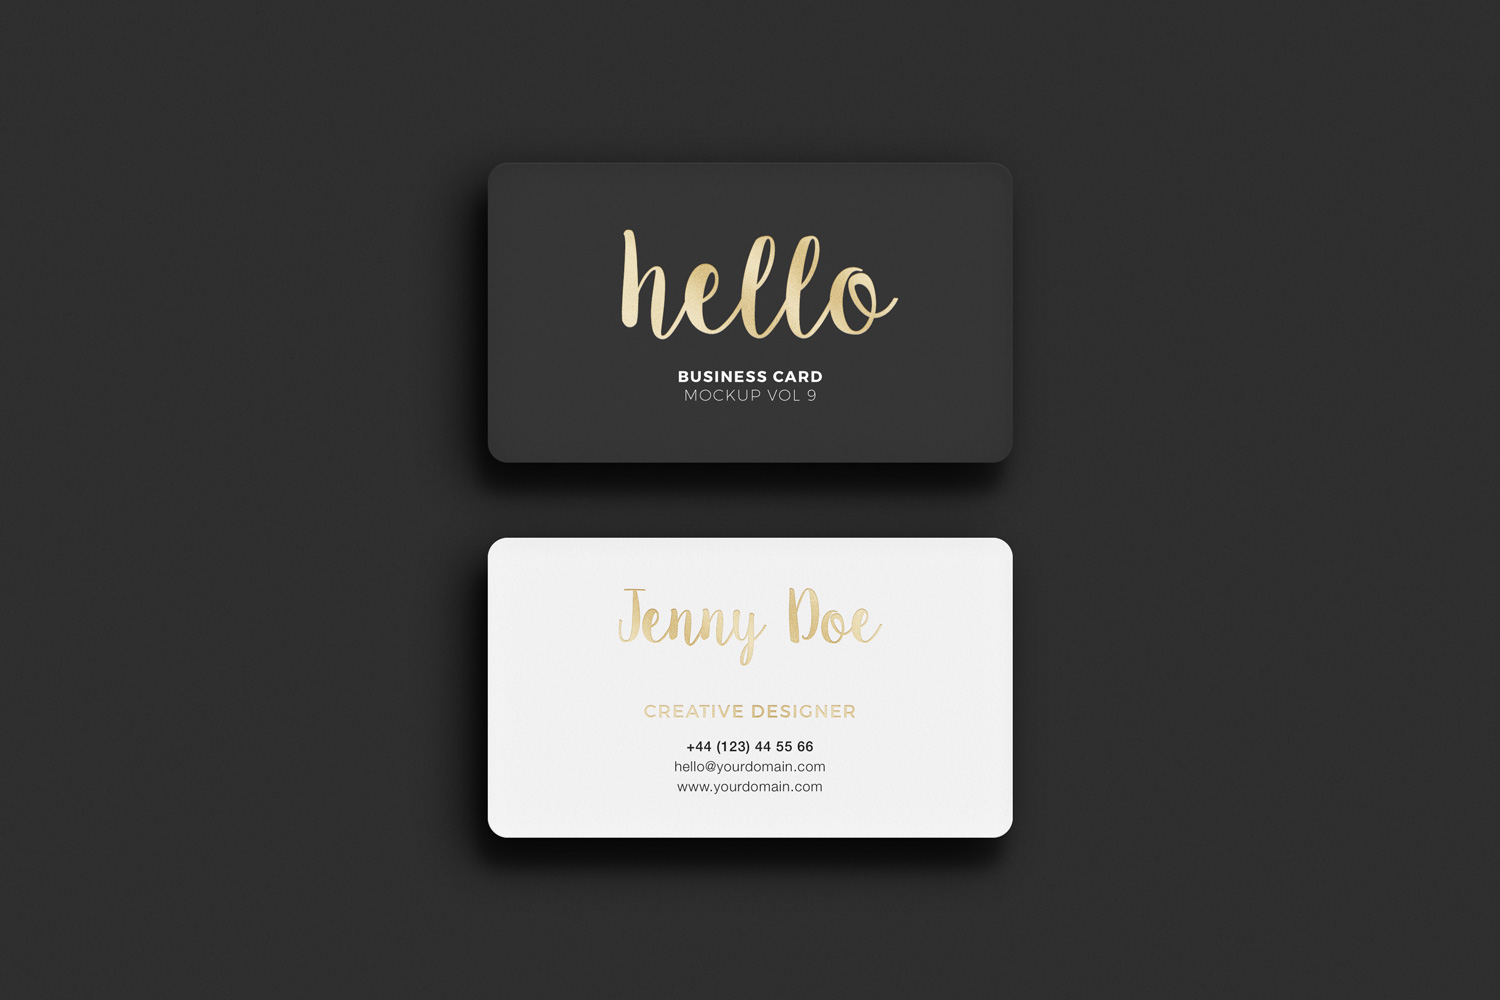 Download Business Card Rounded Corners | Free Mockup